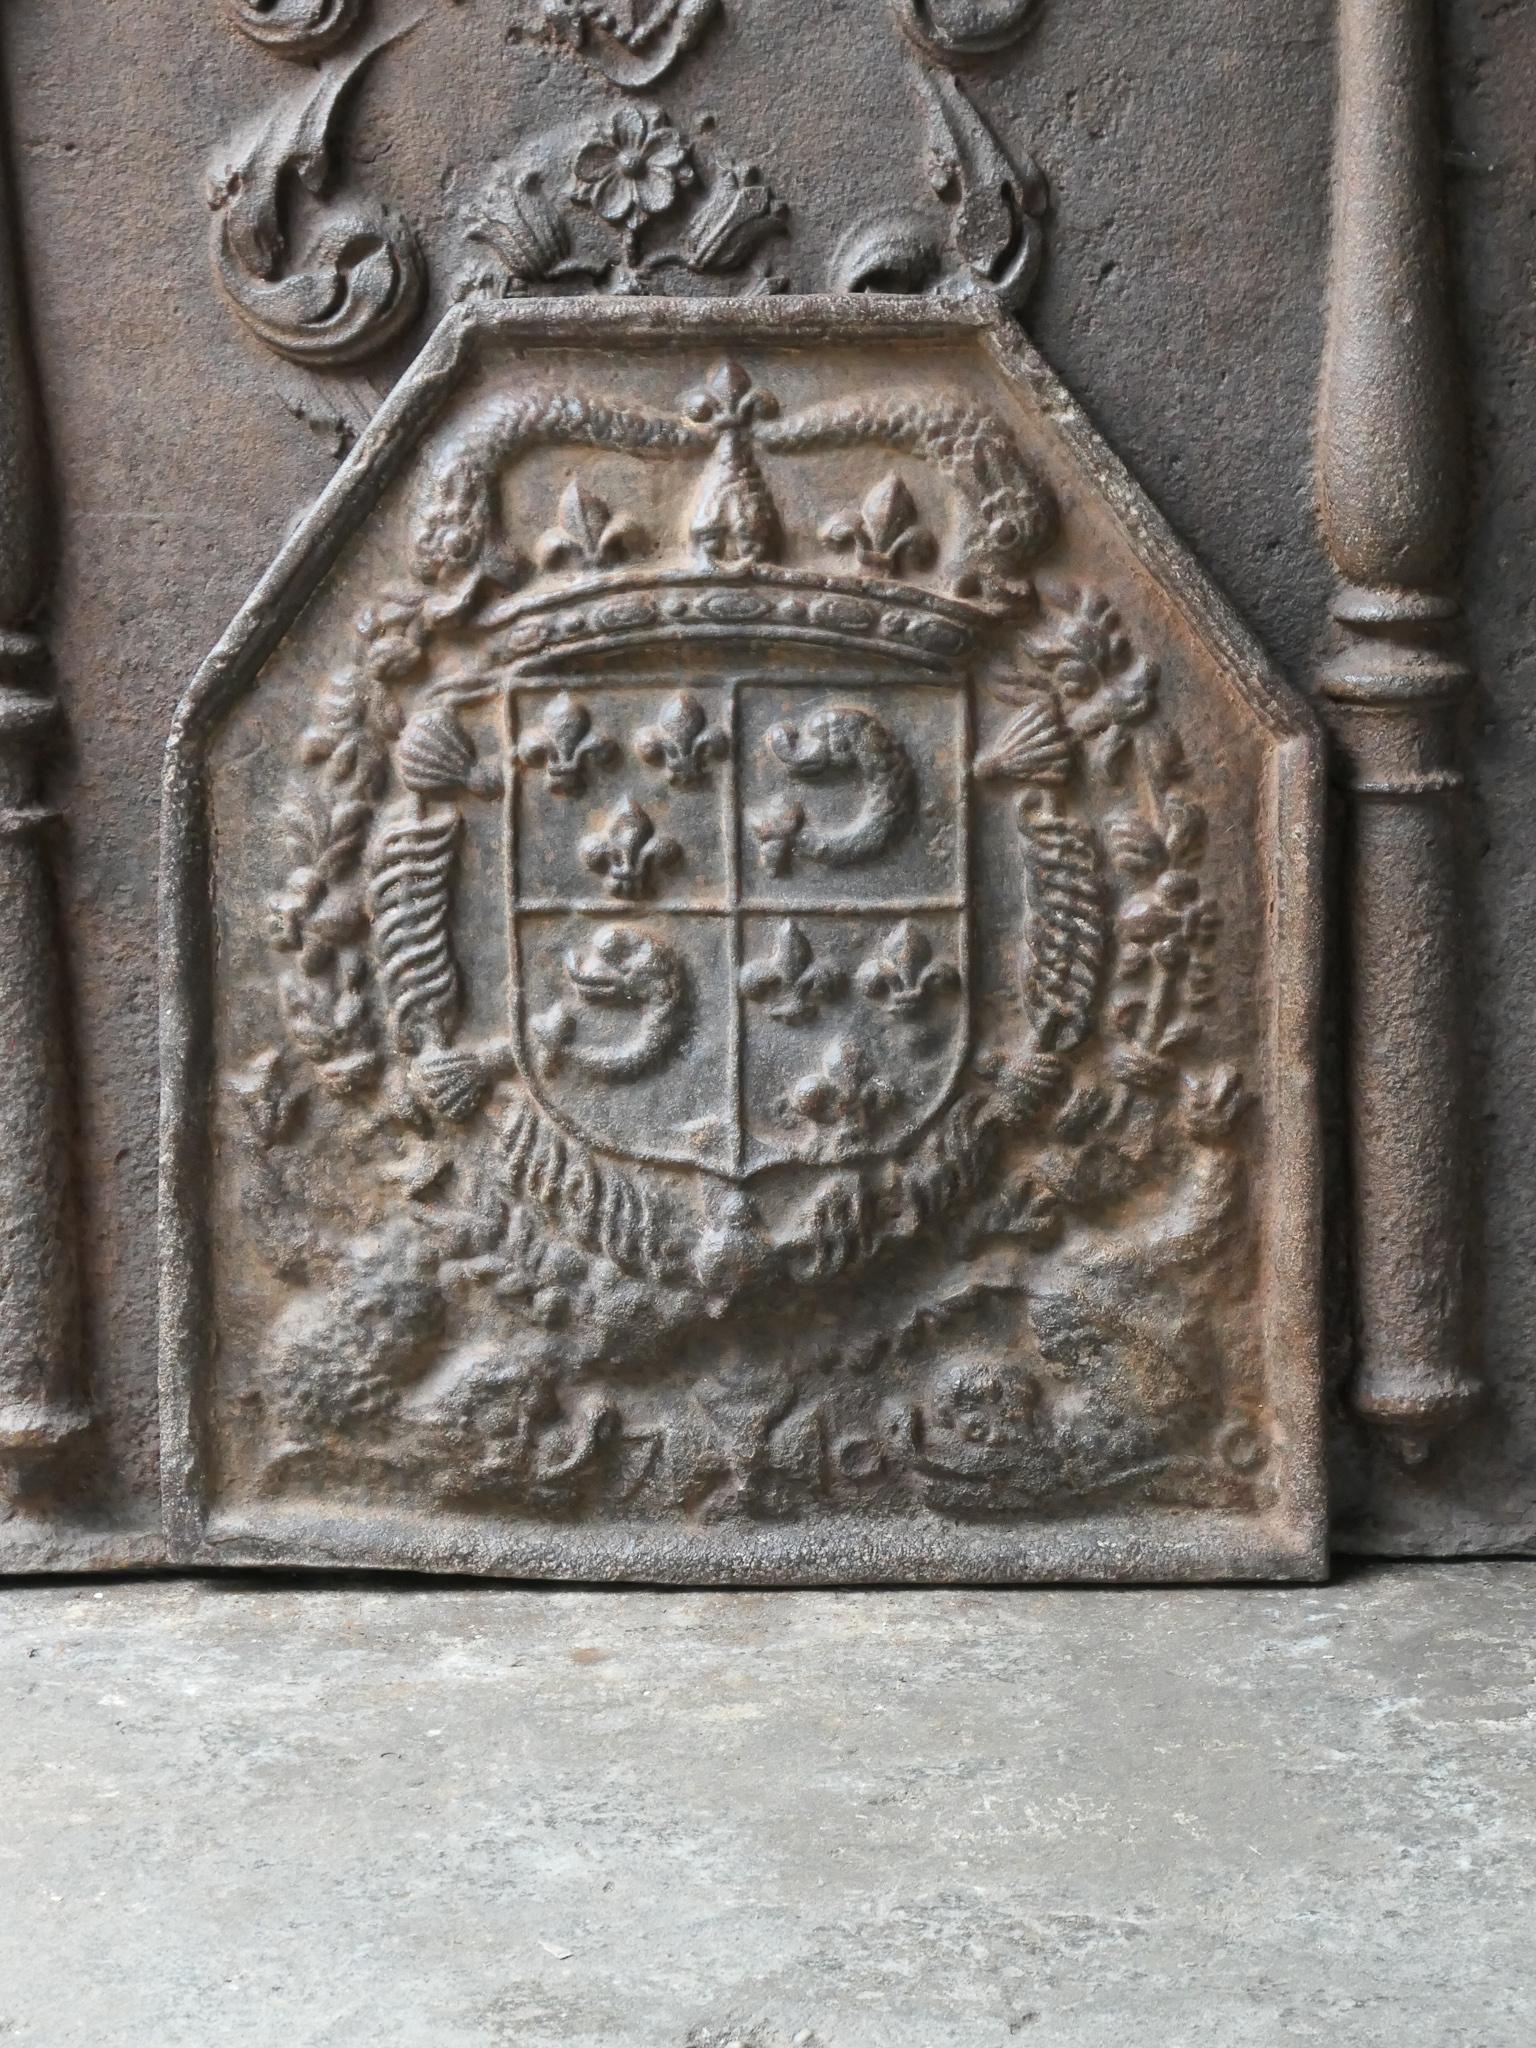 20th Century French Louis XIV style fireback with the Arms of France. A Coat of Arms of the House of Bourbon, an originally French royal house that became a major dynasty in Europe. The house delivered kings for Spain (Navarra), France, both